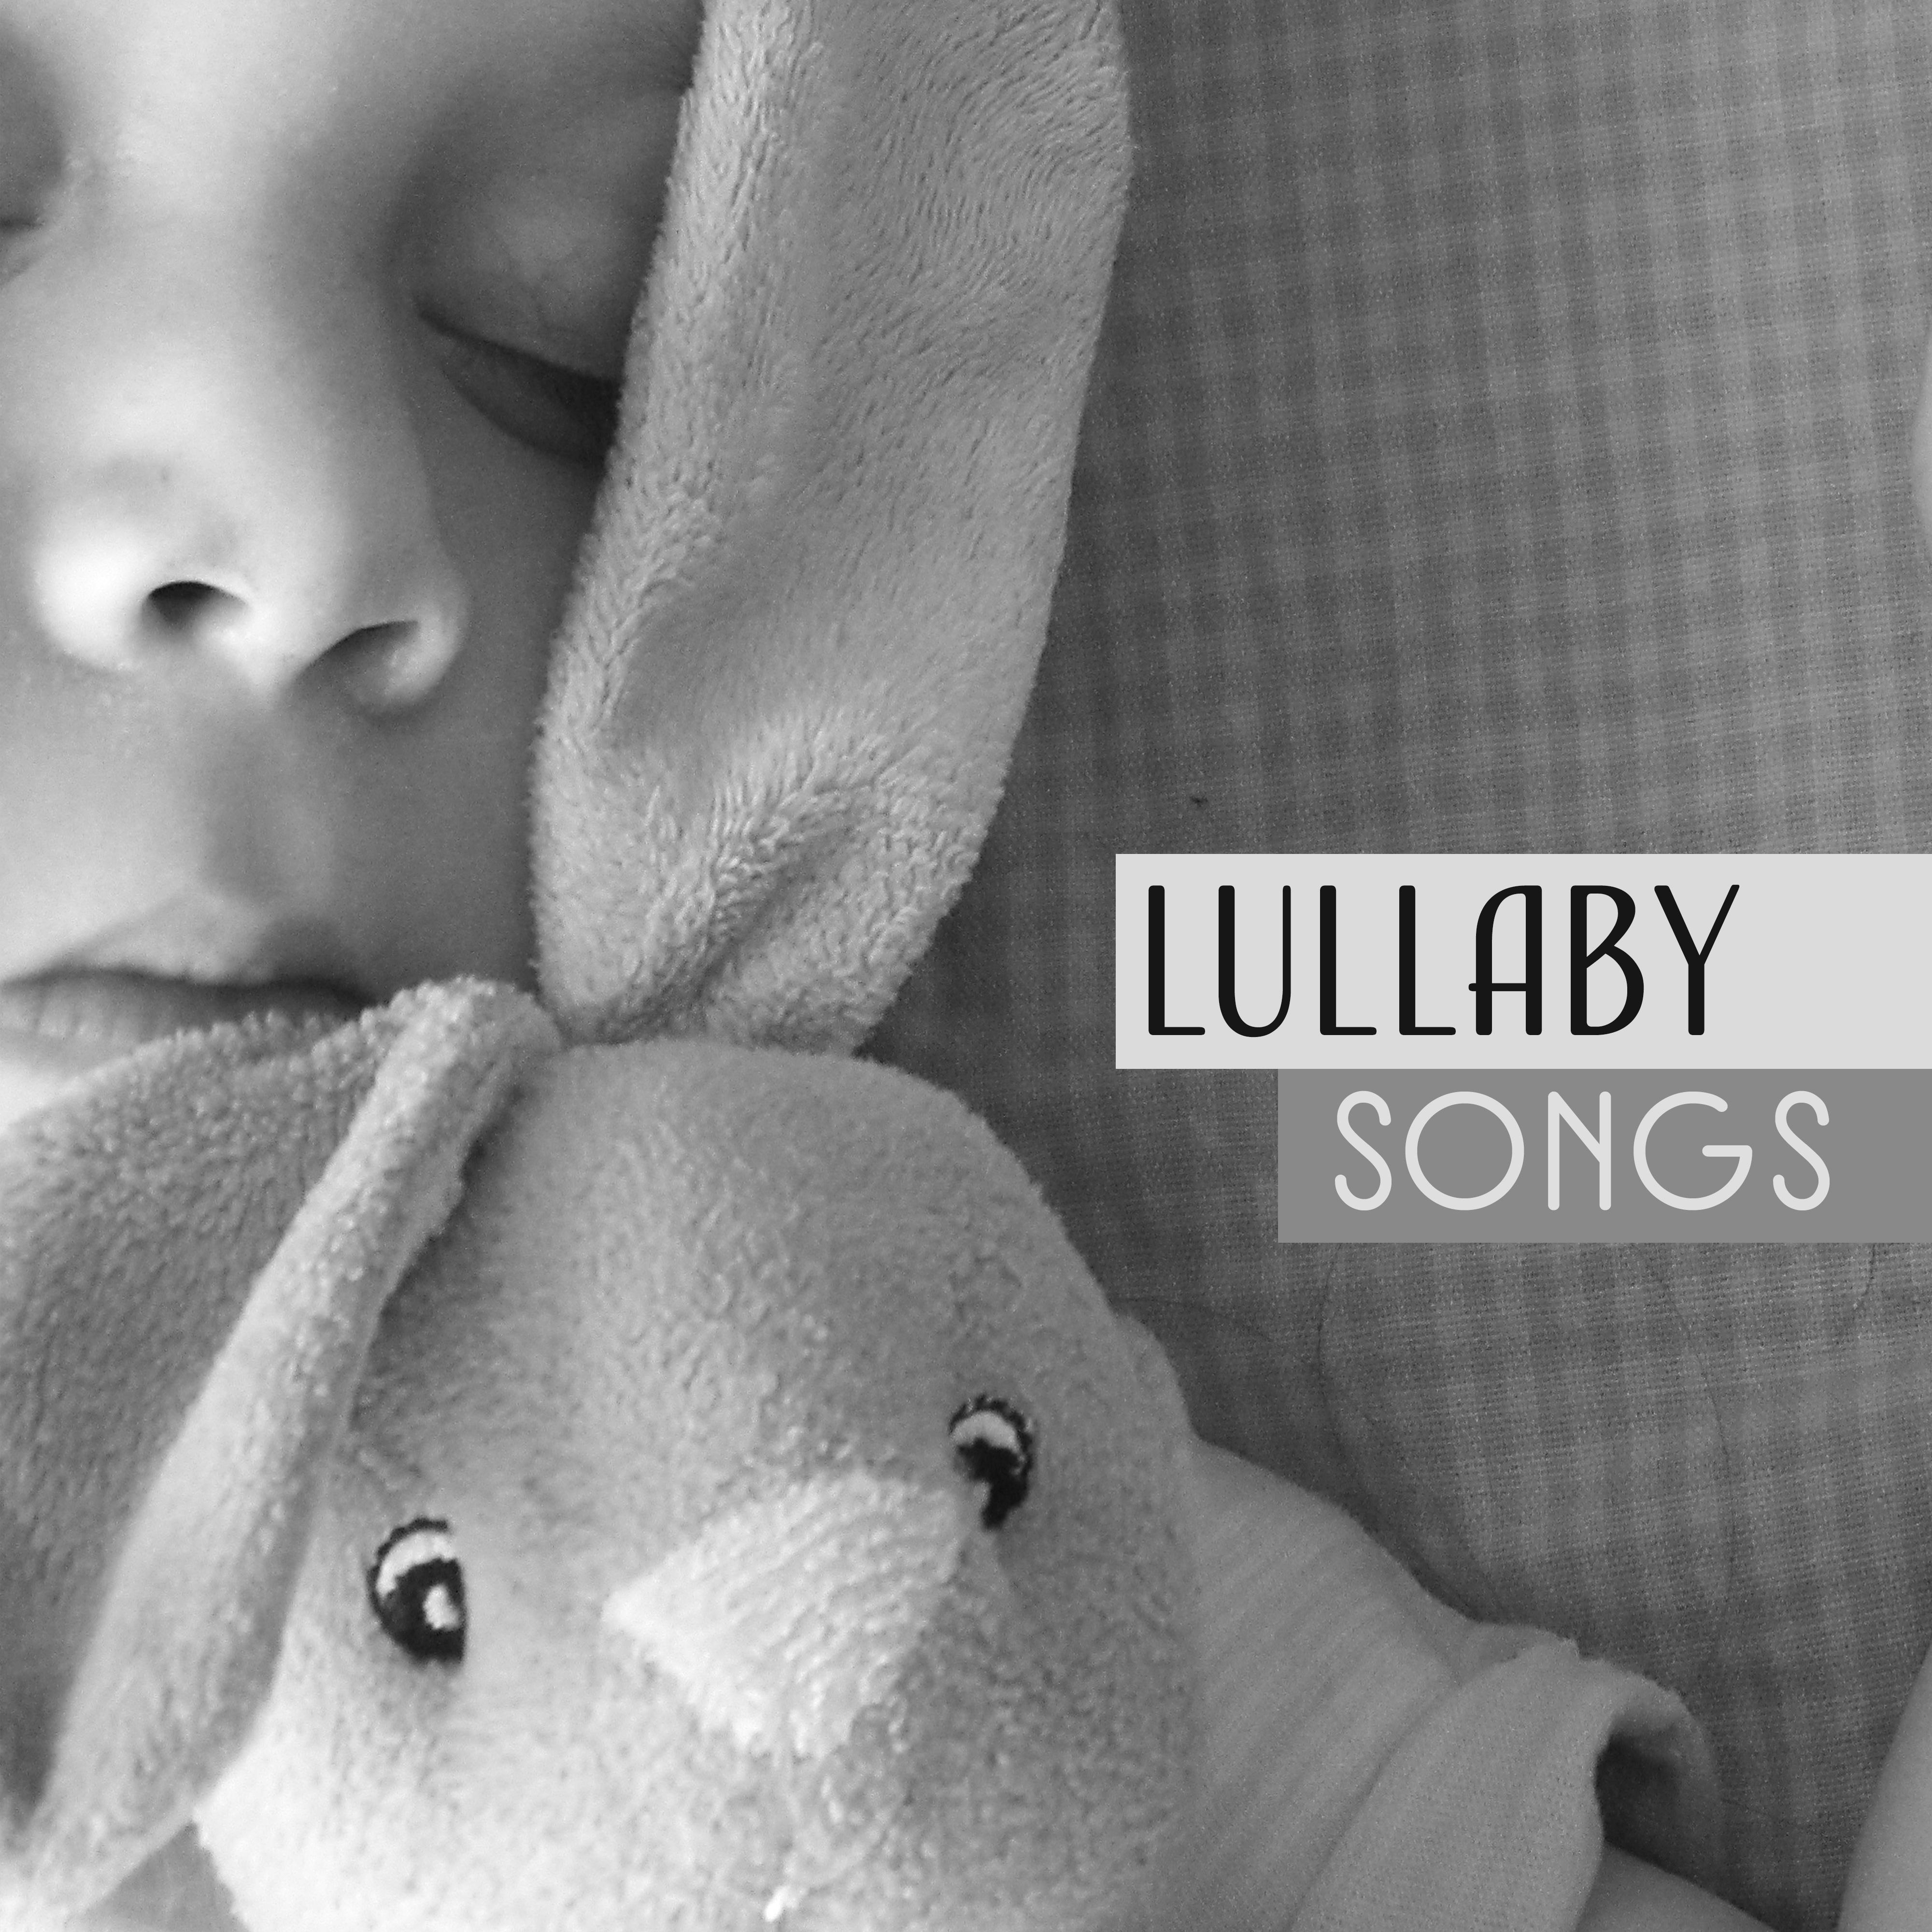 Lullaby Songs – New Lullabies Compilation, Classical Music for Babies, Smart & Healthy Baby Development